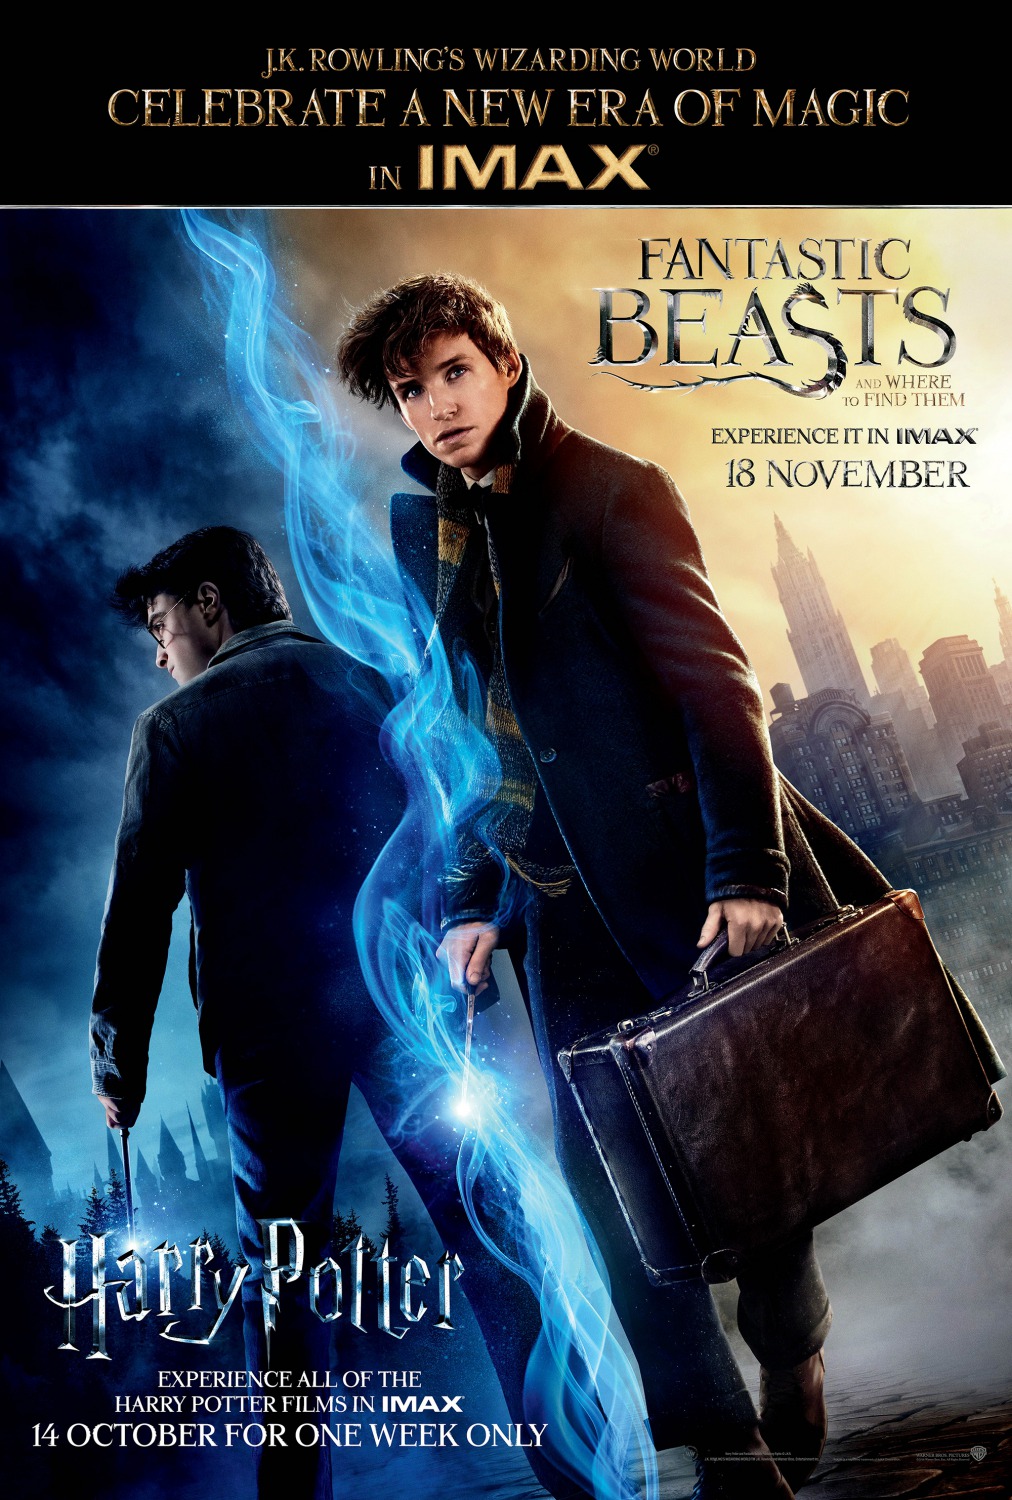 2016 Movie Hd Fantastic Beasts And Where To Find Them Online